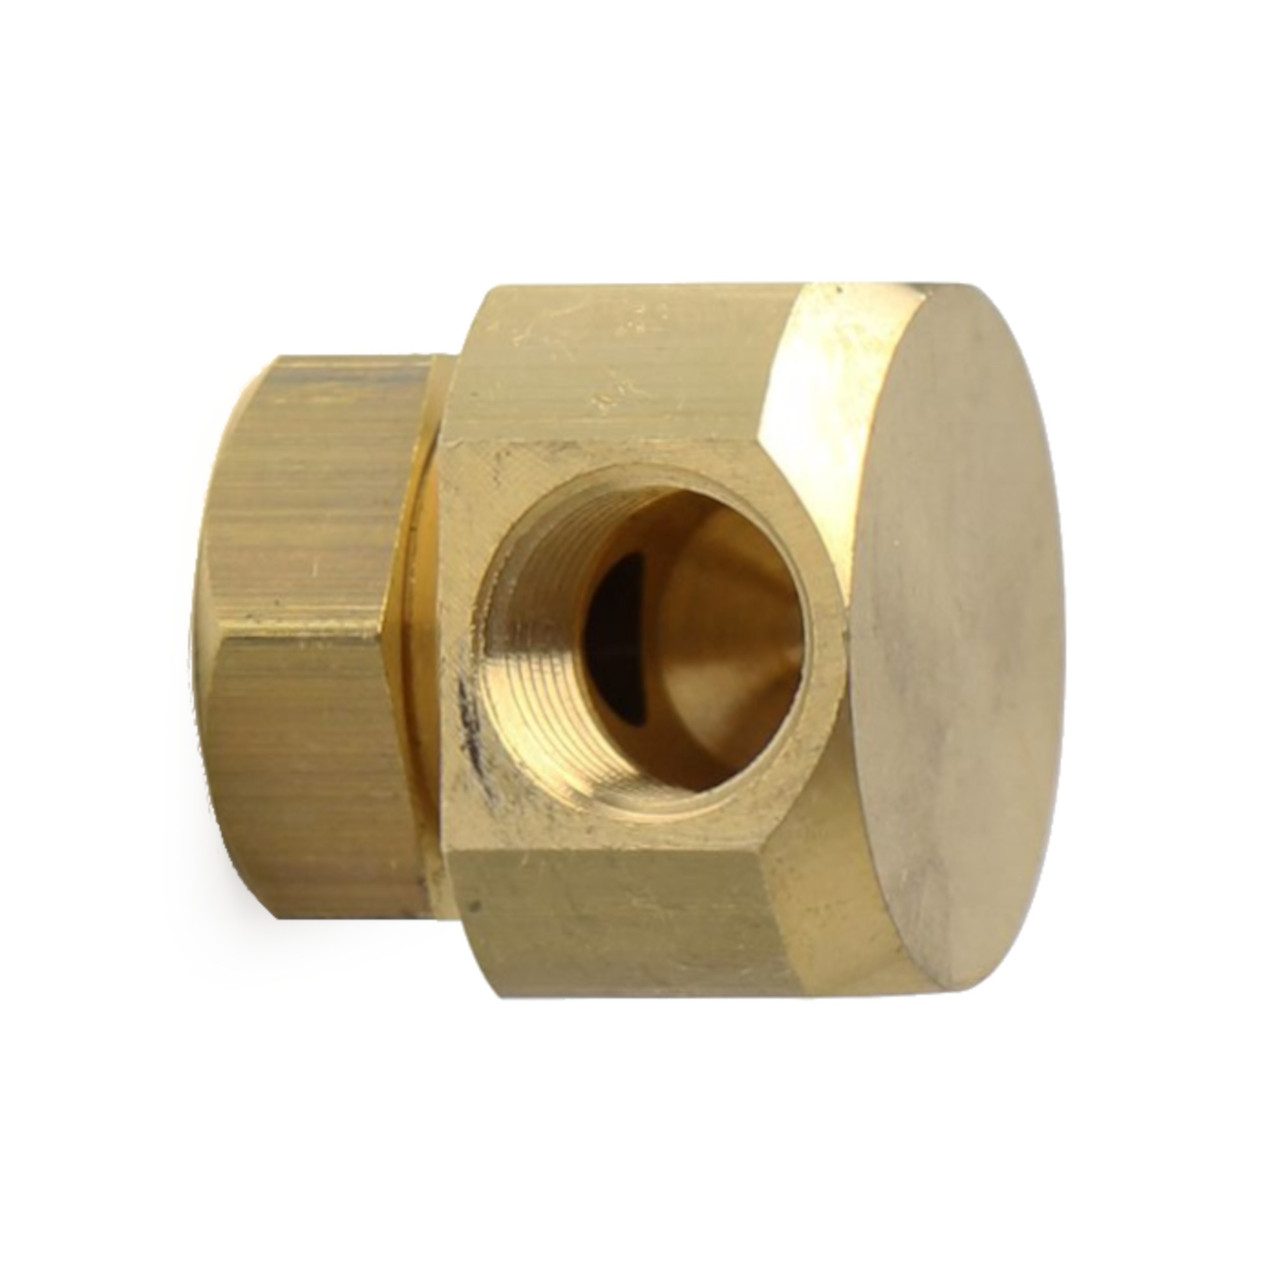 Compression fitting for Vibration Pump - 90 Degree L Shaped - 1/8